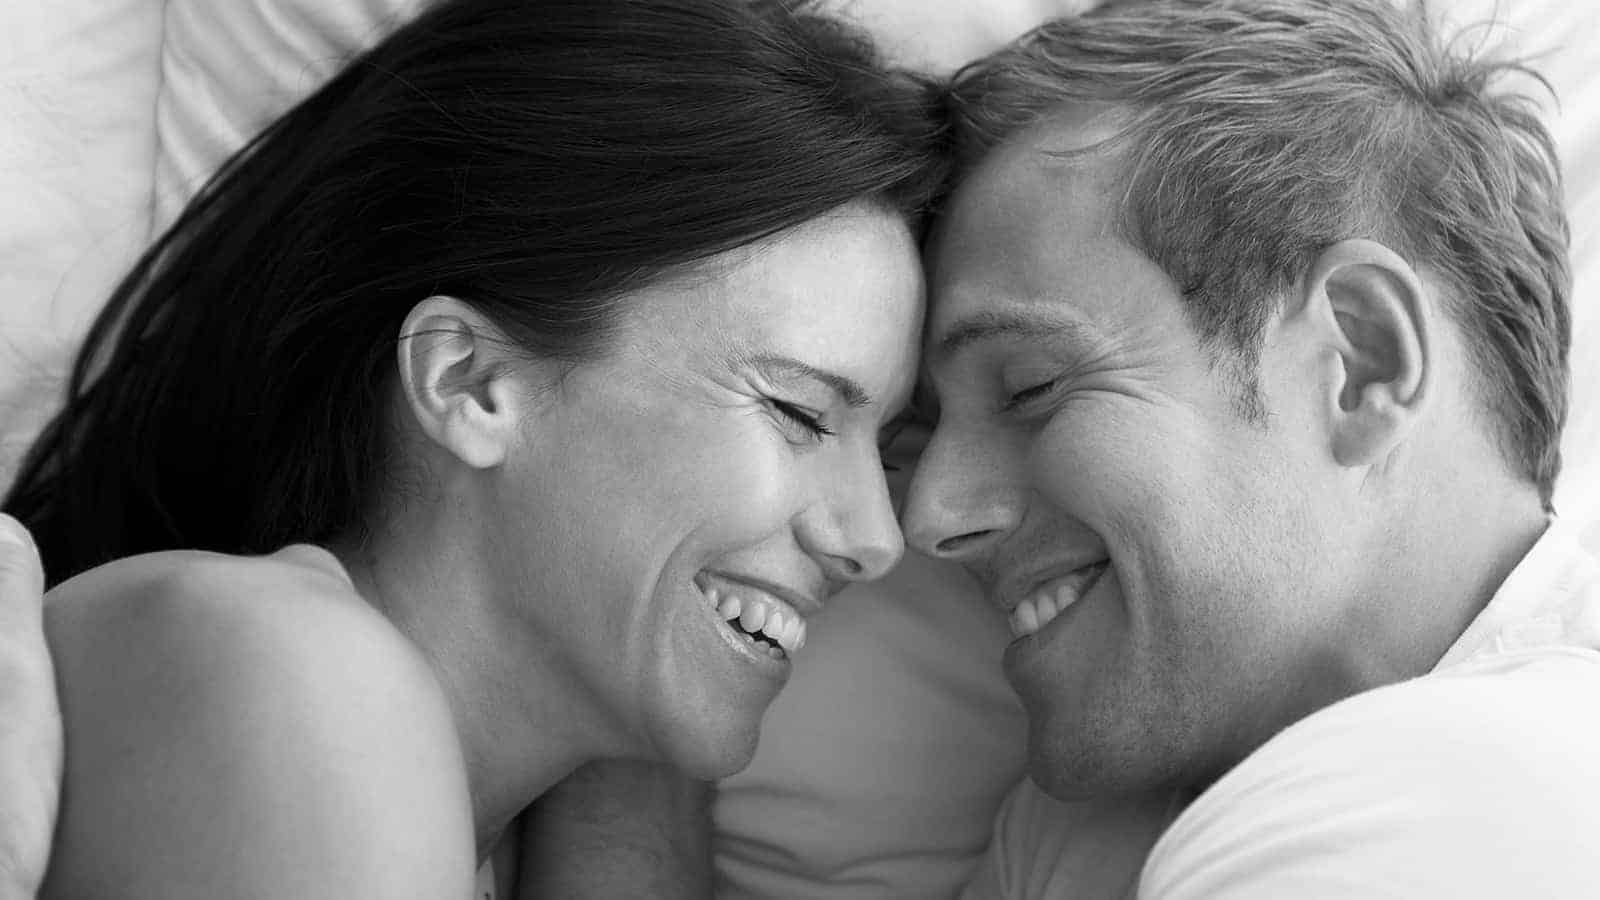 5 Traits Men Look For In a Wife